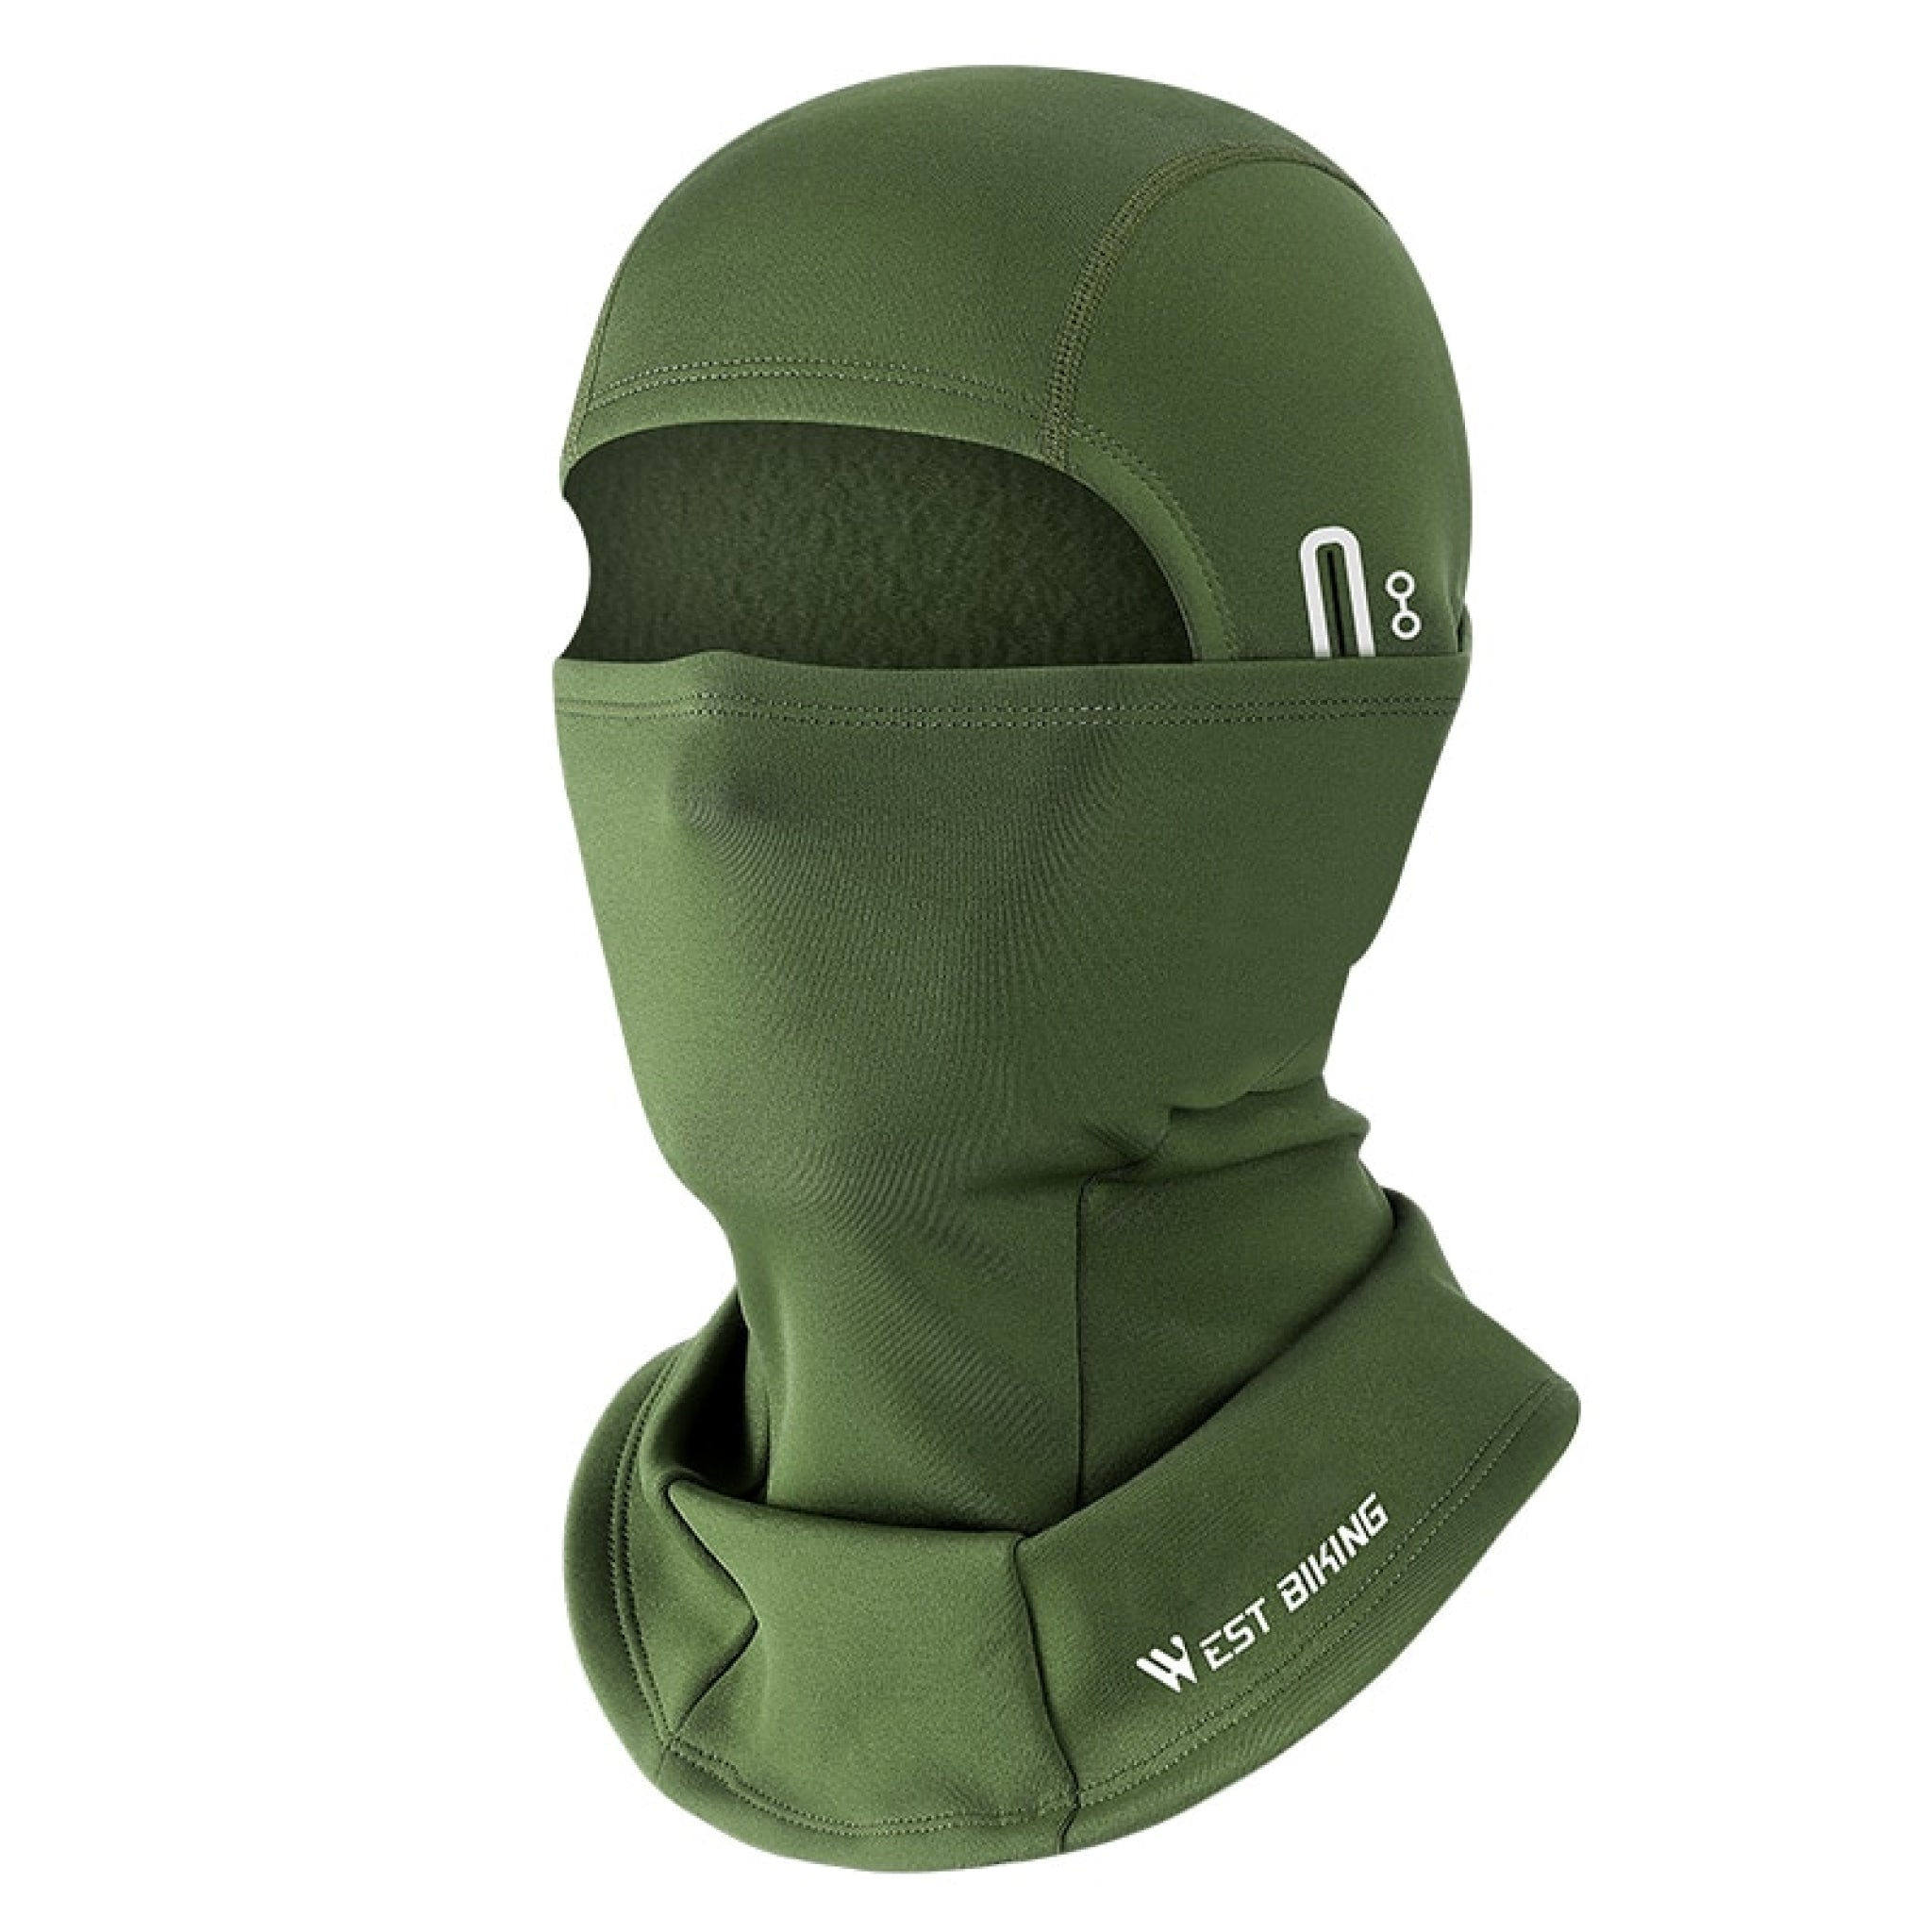 Cagoule anti-froid vélo